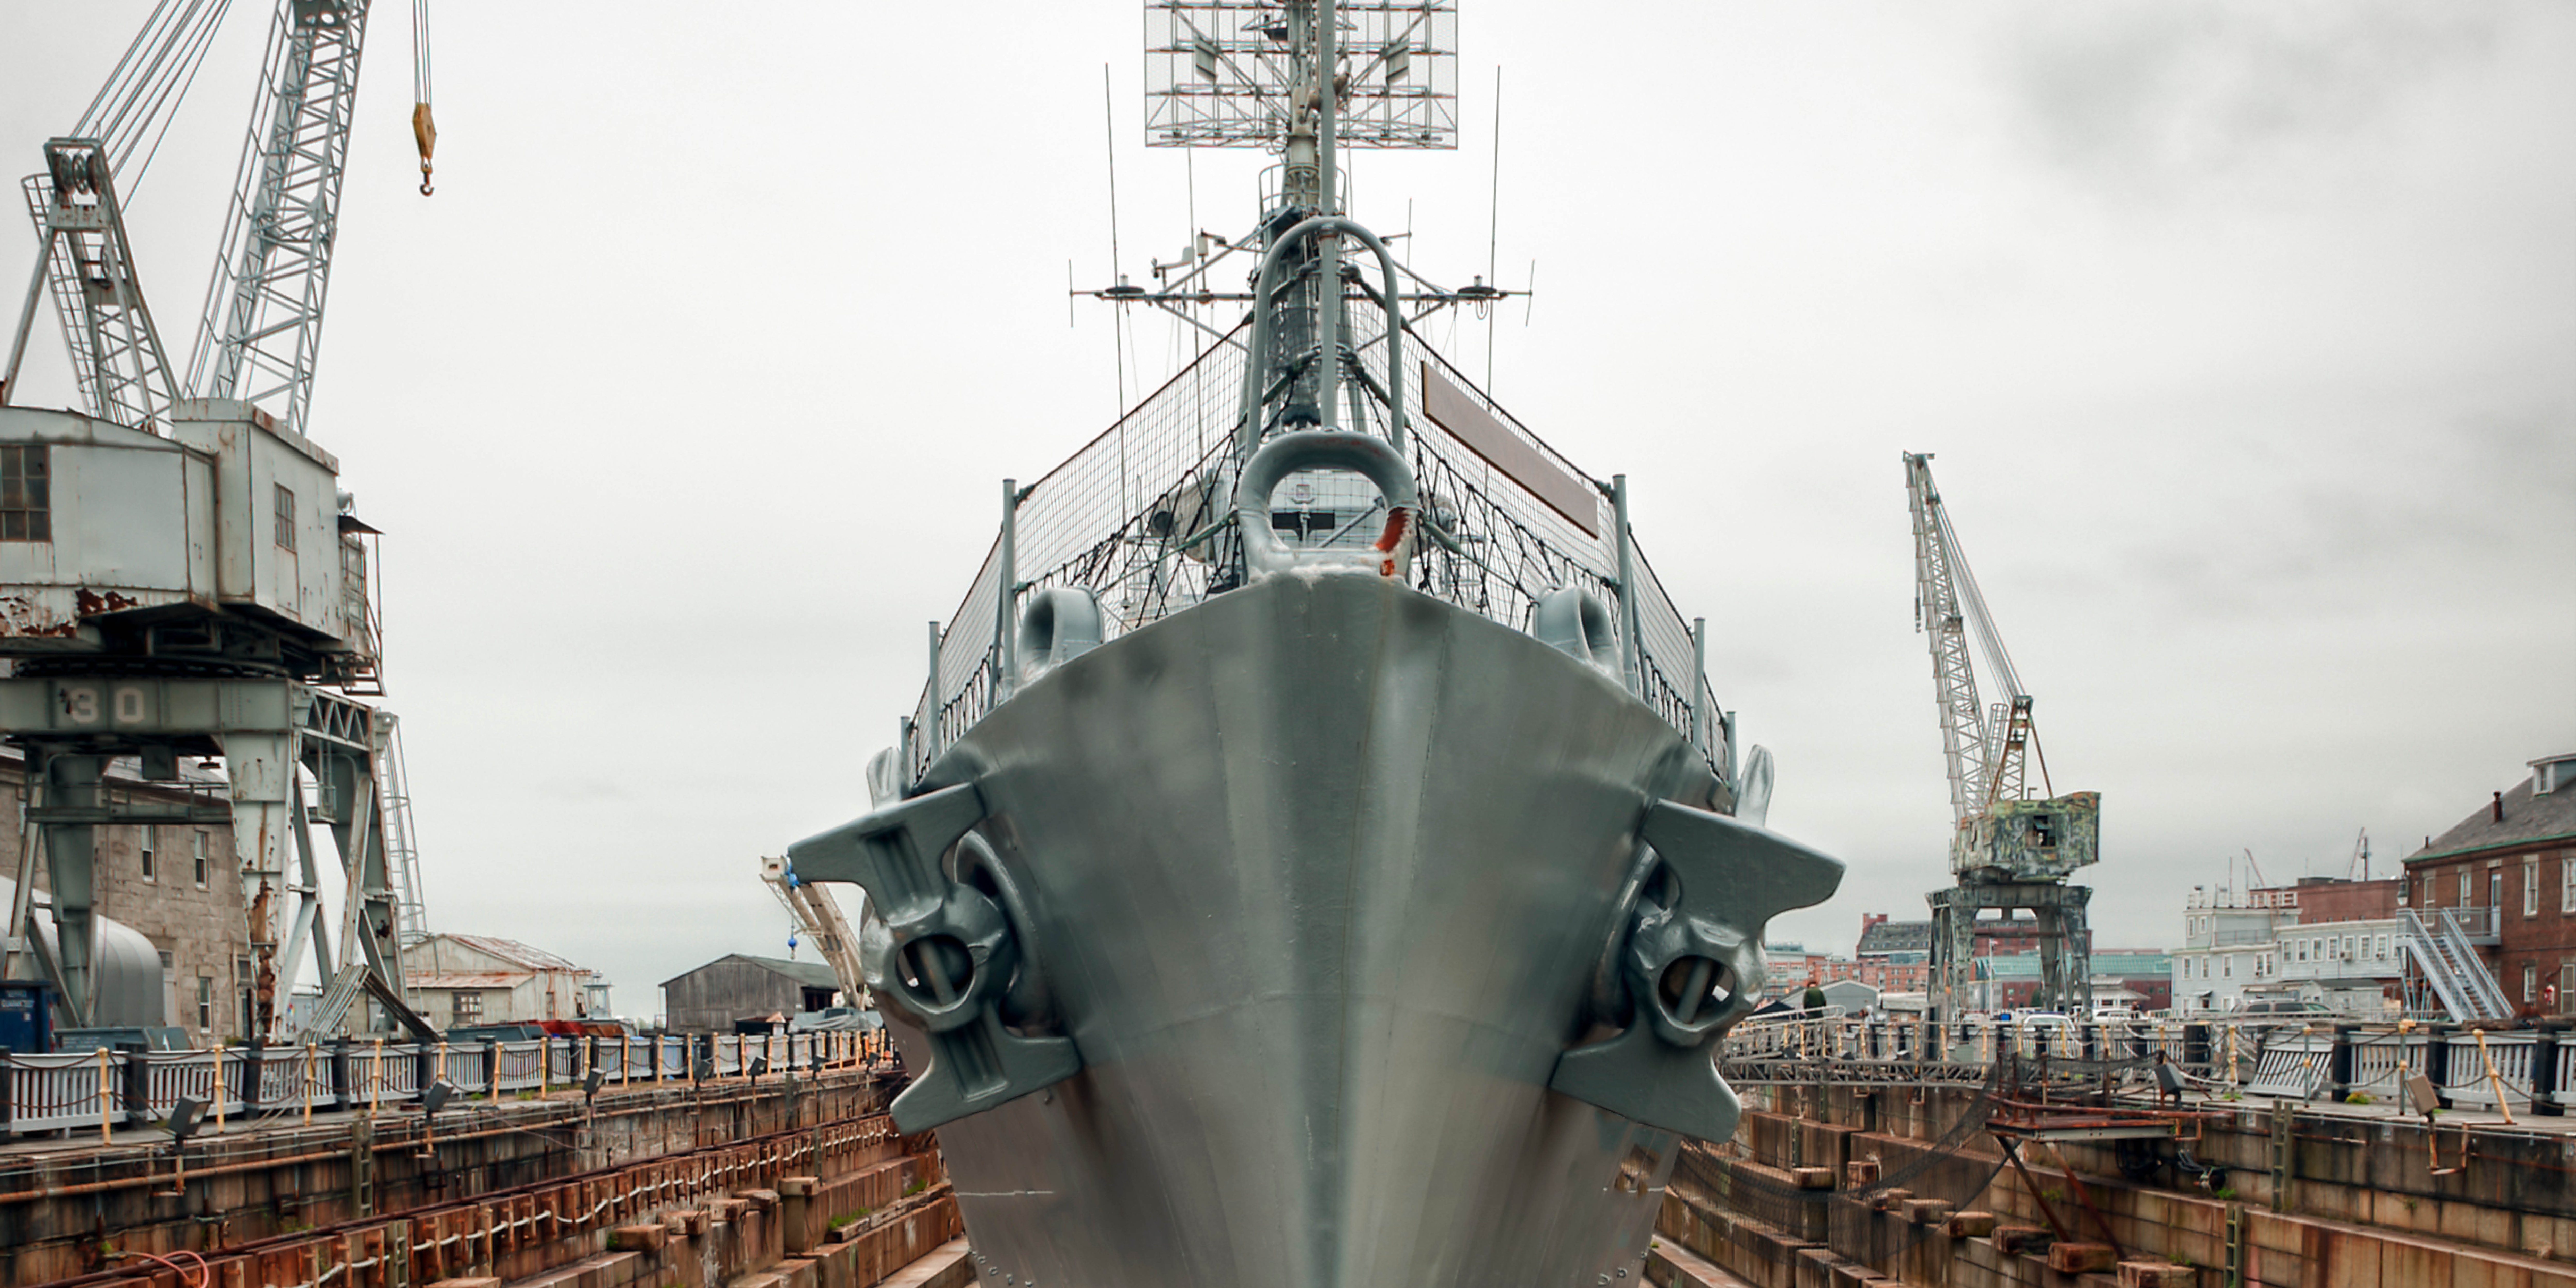 Image of the front of a US naval ship in a harbor